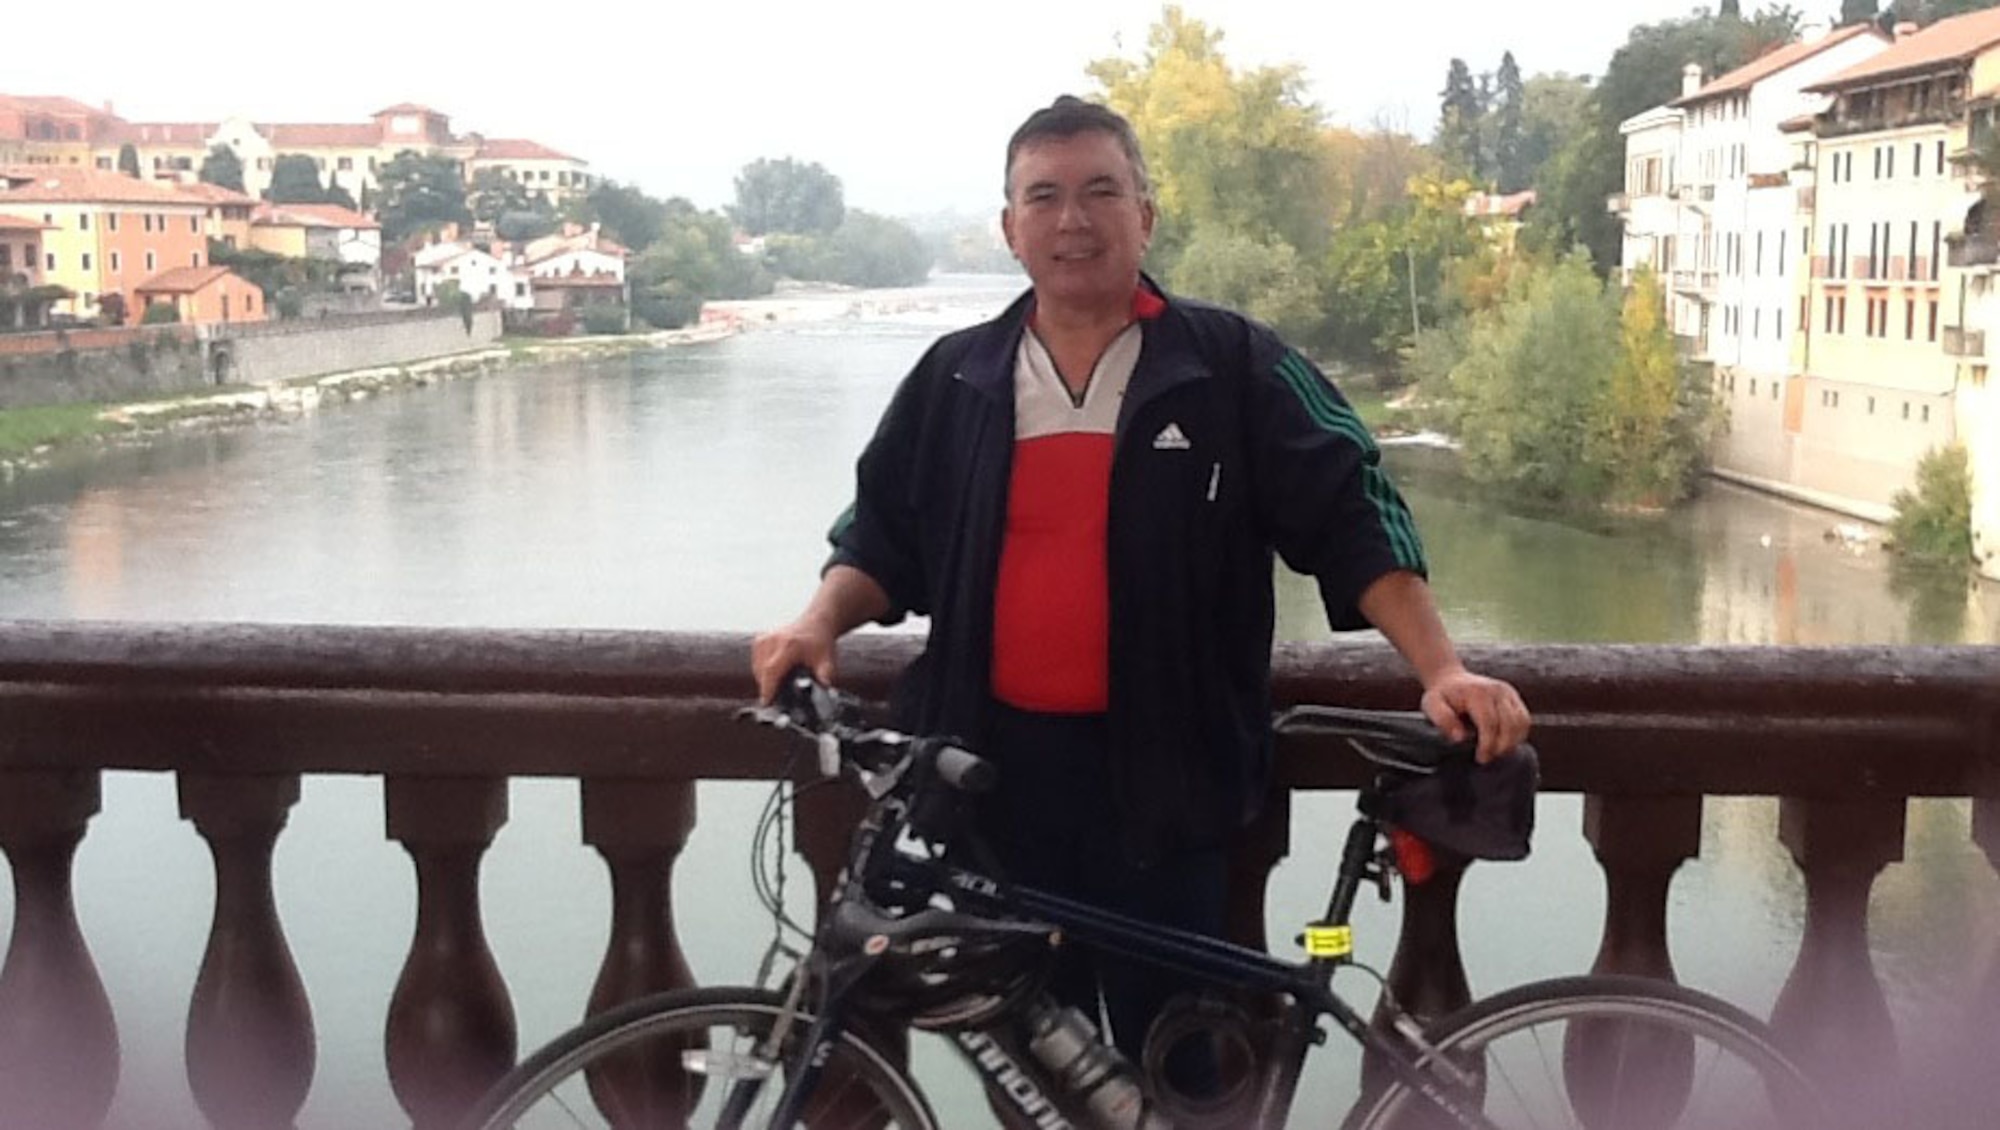 Mike Nishimuta poses for a photo after completing a 50-mile bike ride from Venice to Bassano, Italy, Oct. 19, 2013. In 1968, the Oklahoma native biked more than 3,000 miles through Europe over a five month period. 